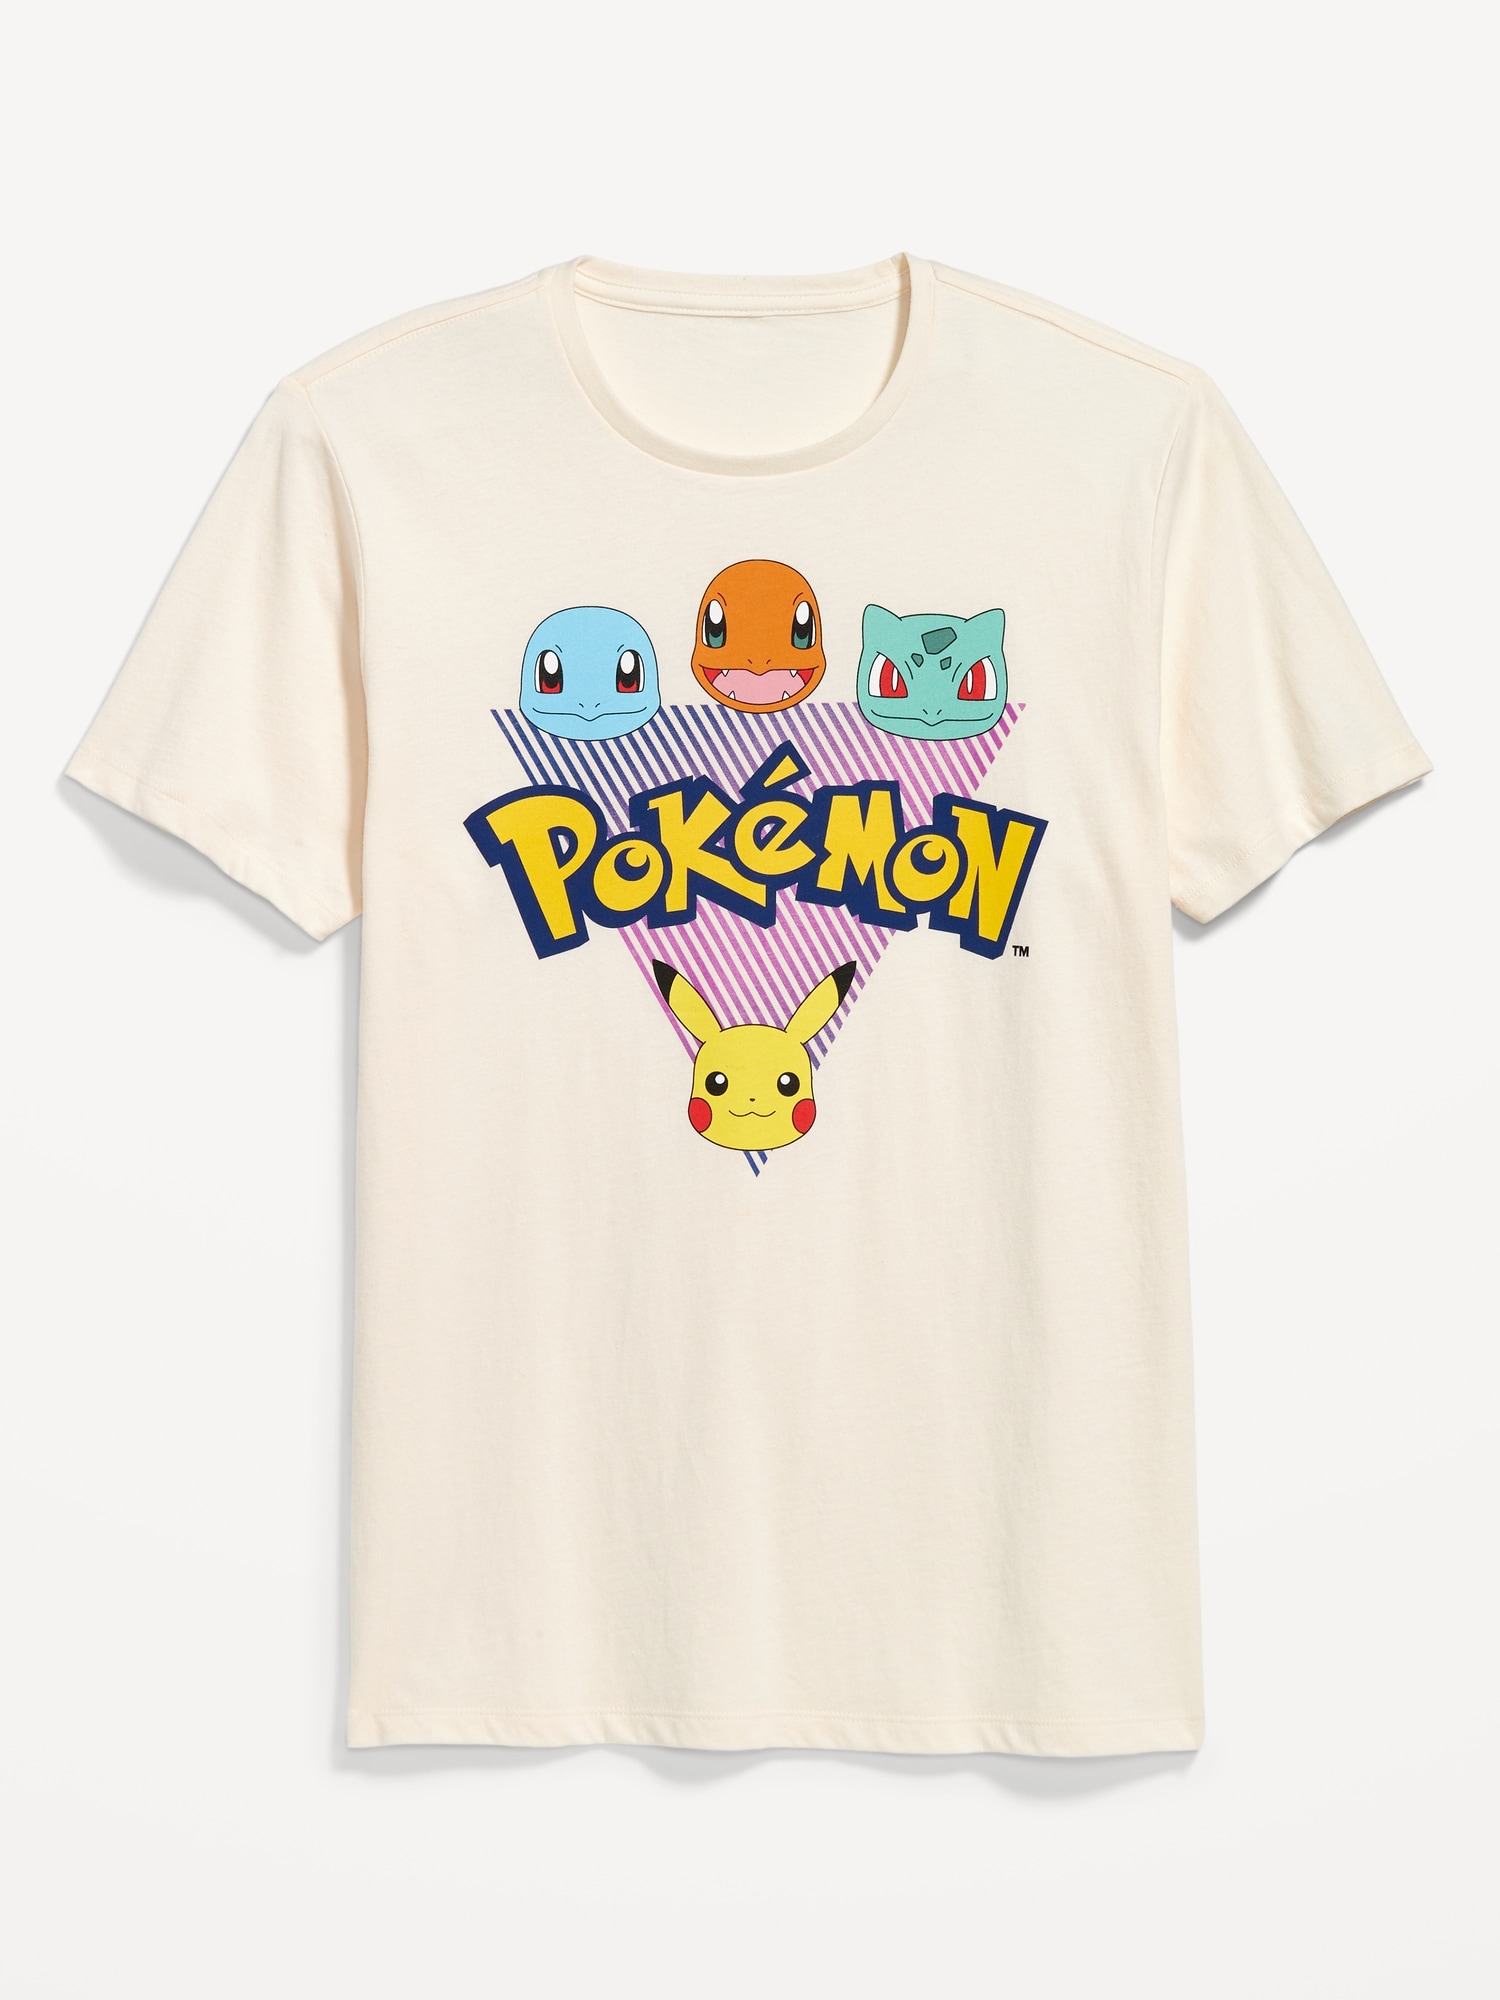 Pokémon™ Gender-Neutral Graphic T-Shirt for Adults